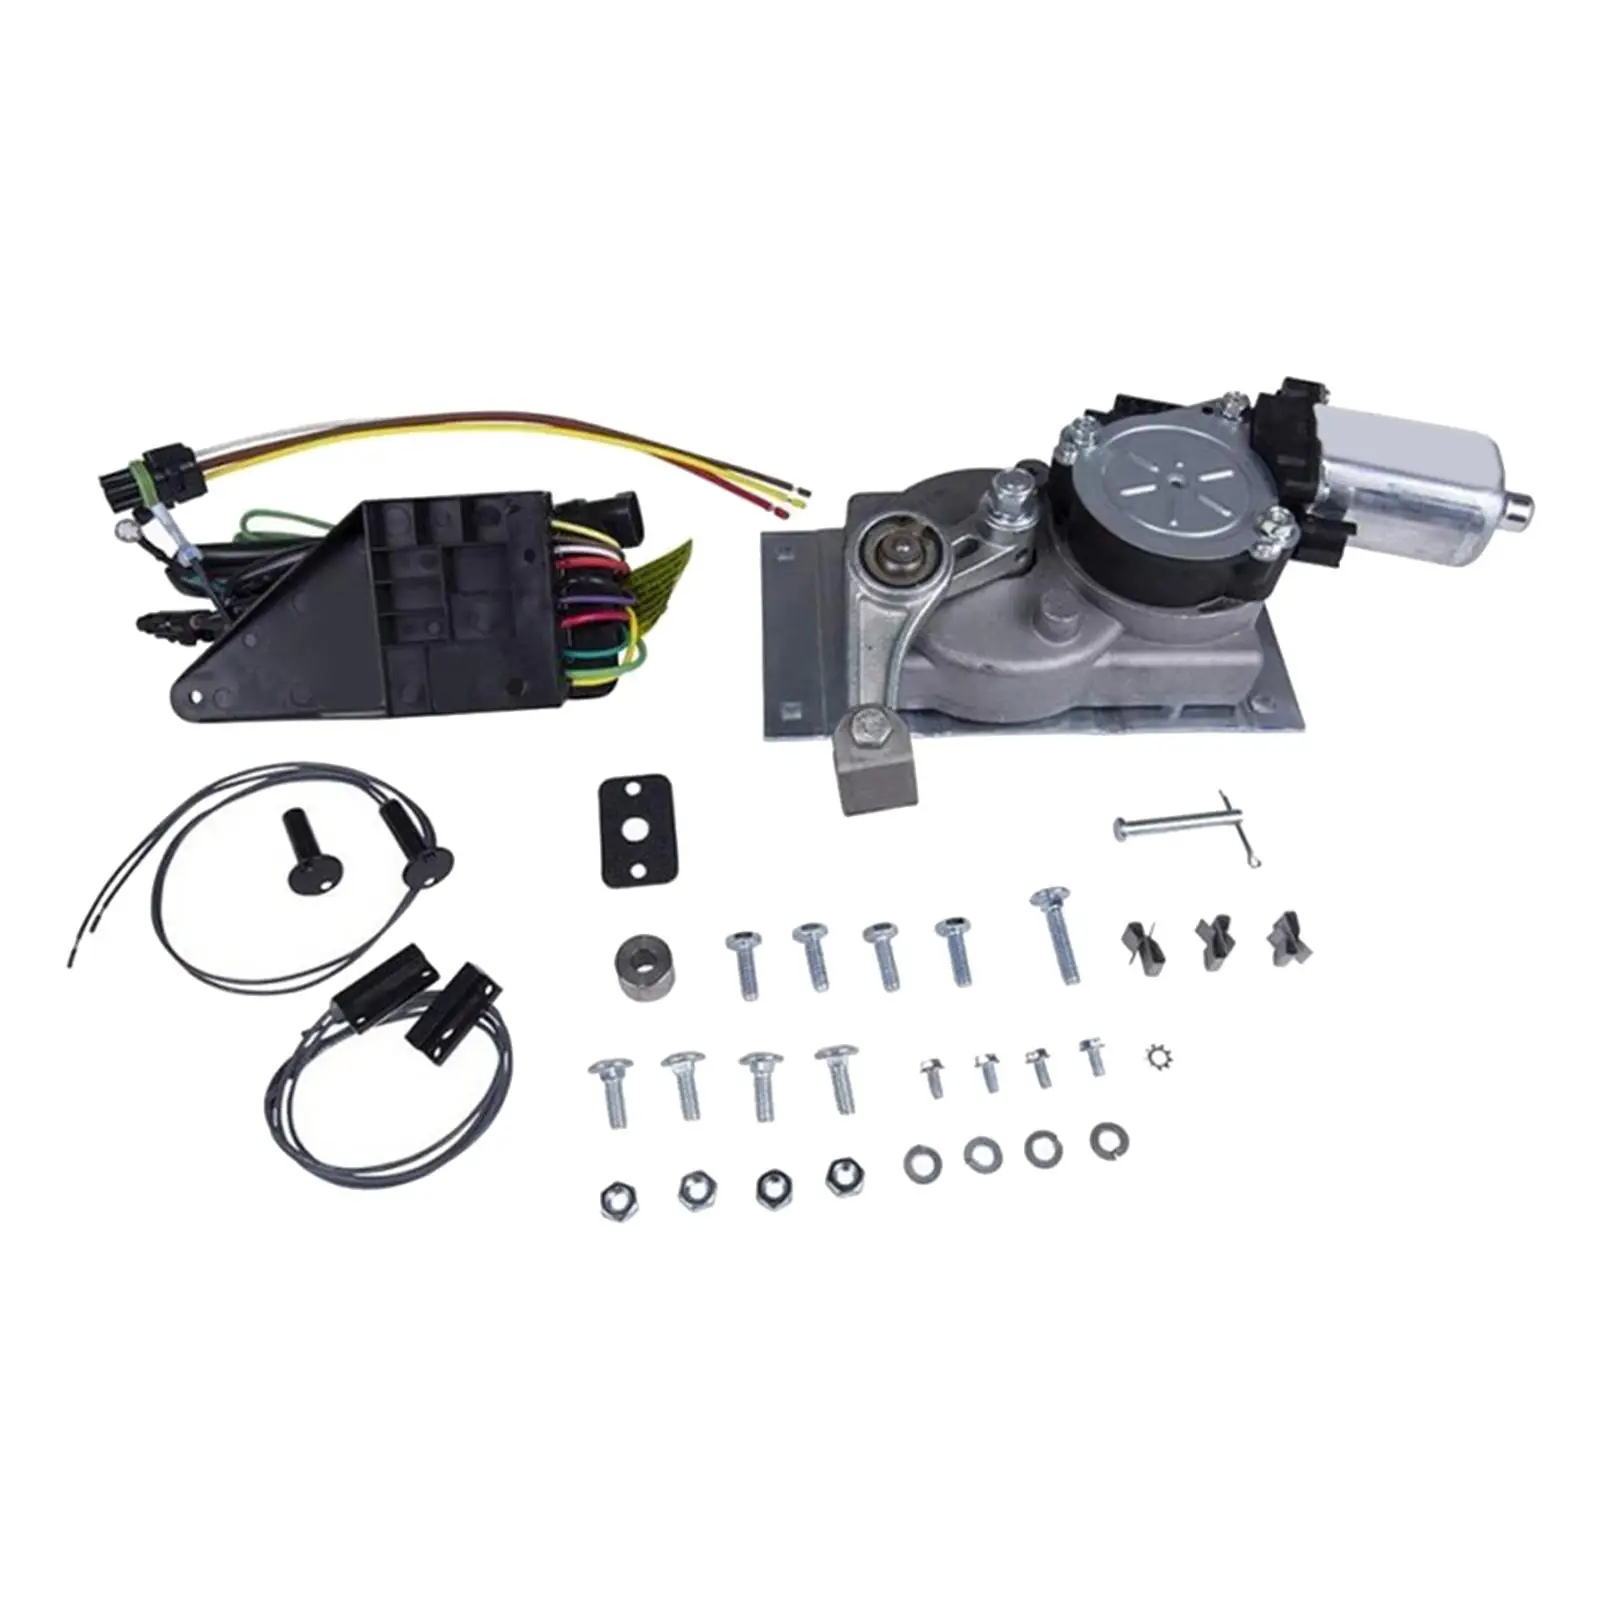 RV Trailer Step Motor Conversion Kit Car Accessories 379769 for Transport Vehicle Durable Convenient Installation Assembly